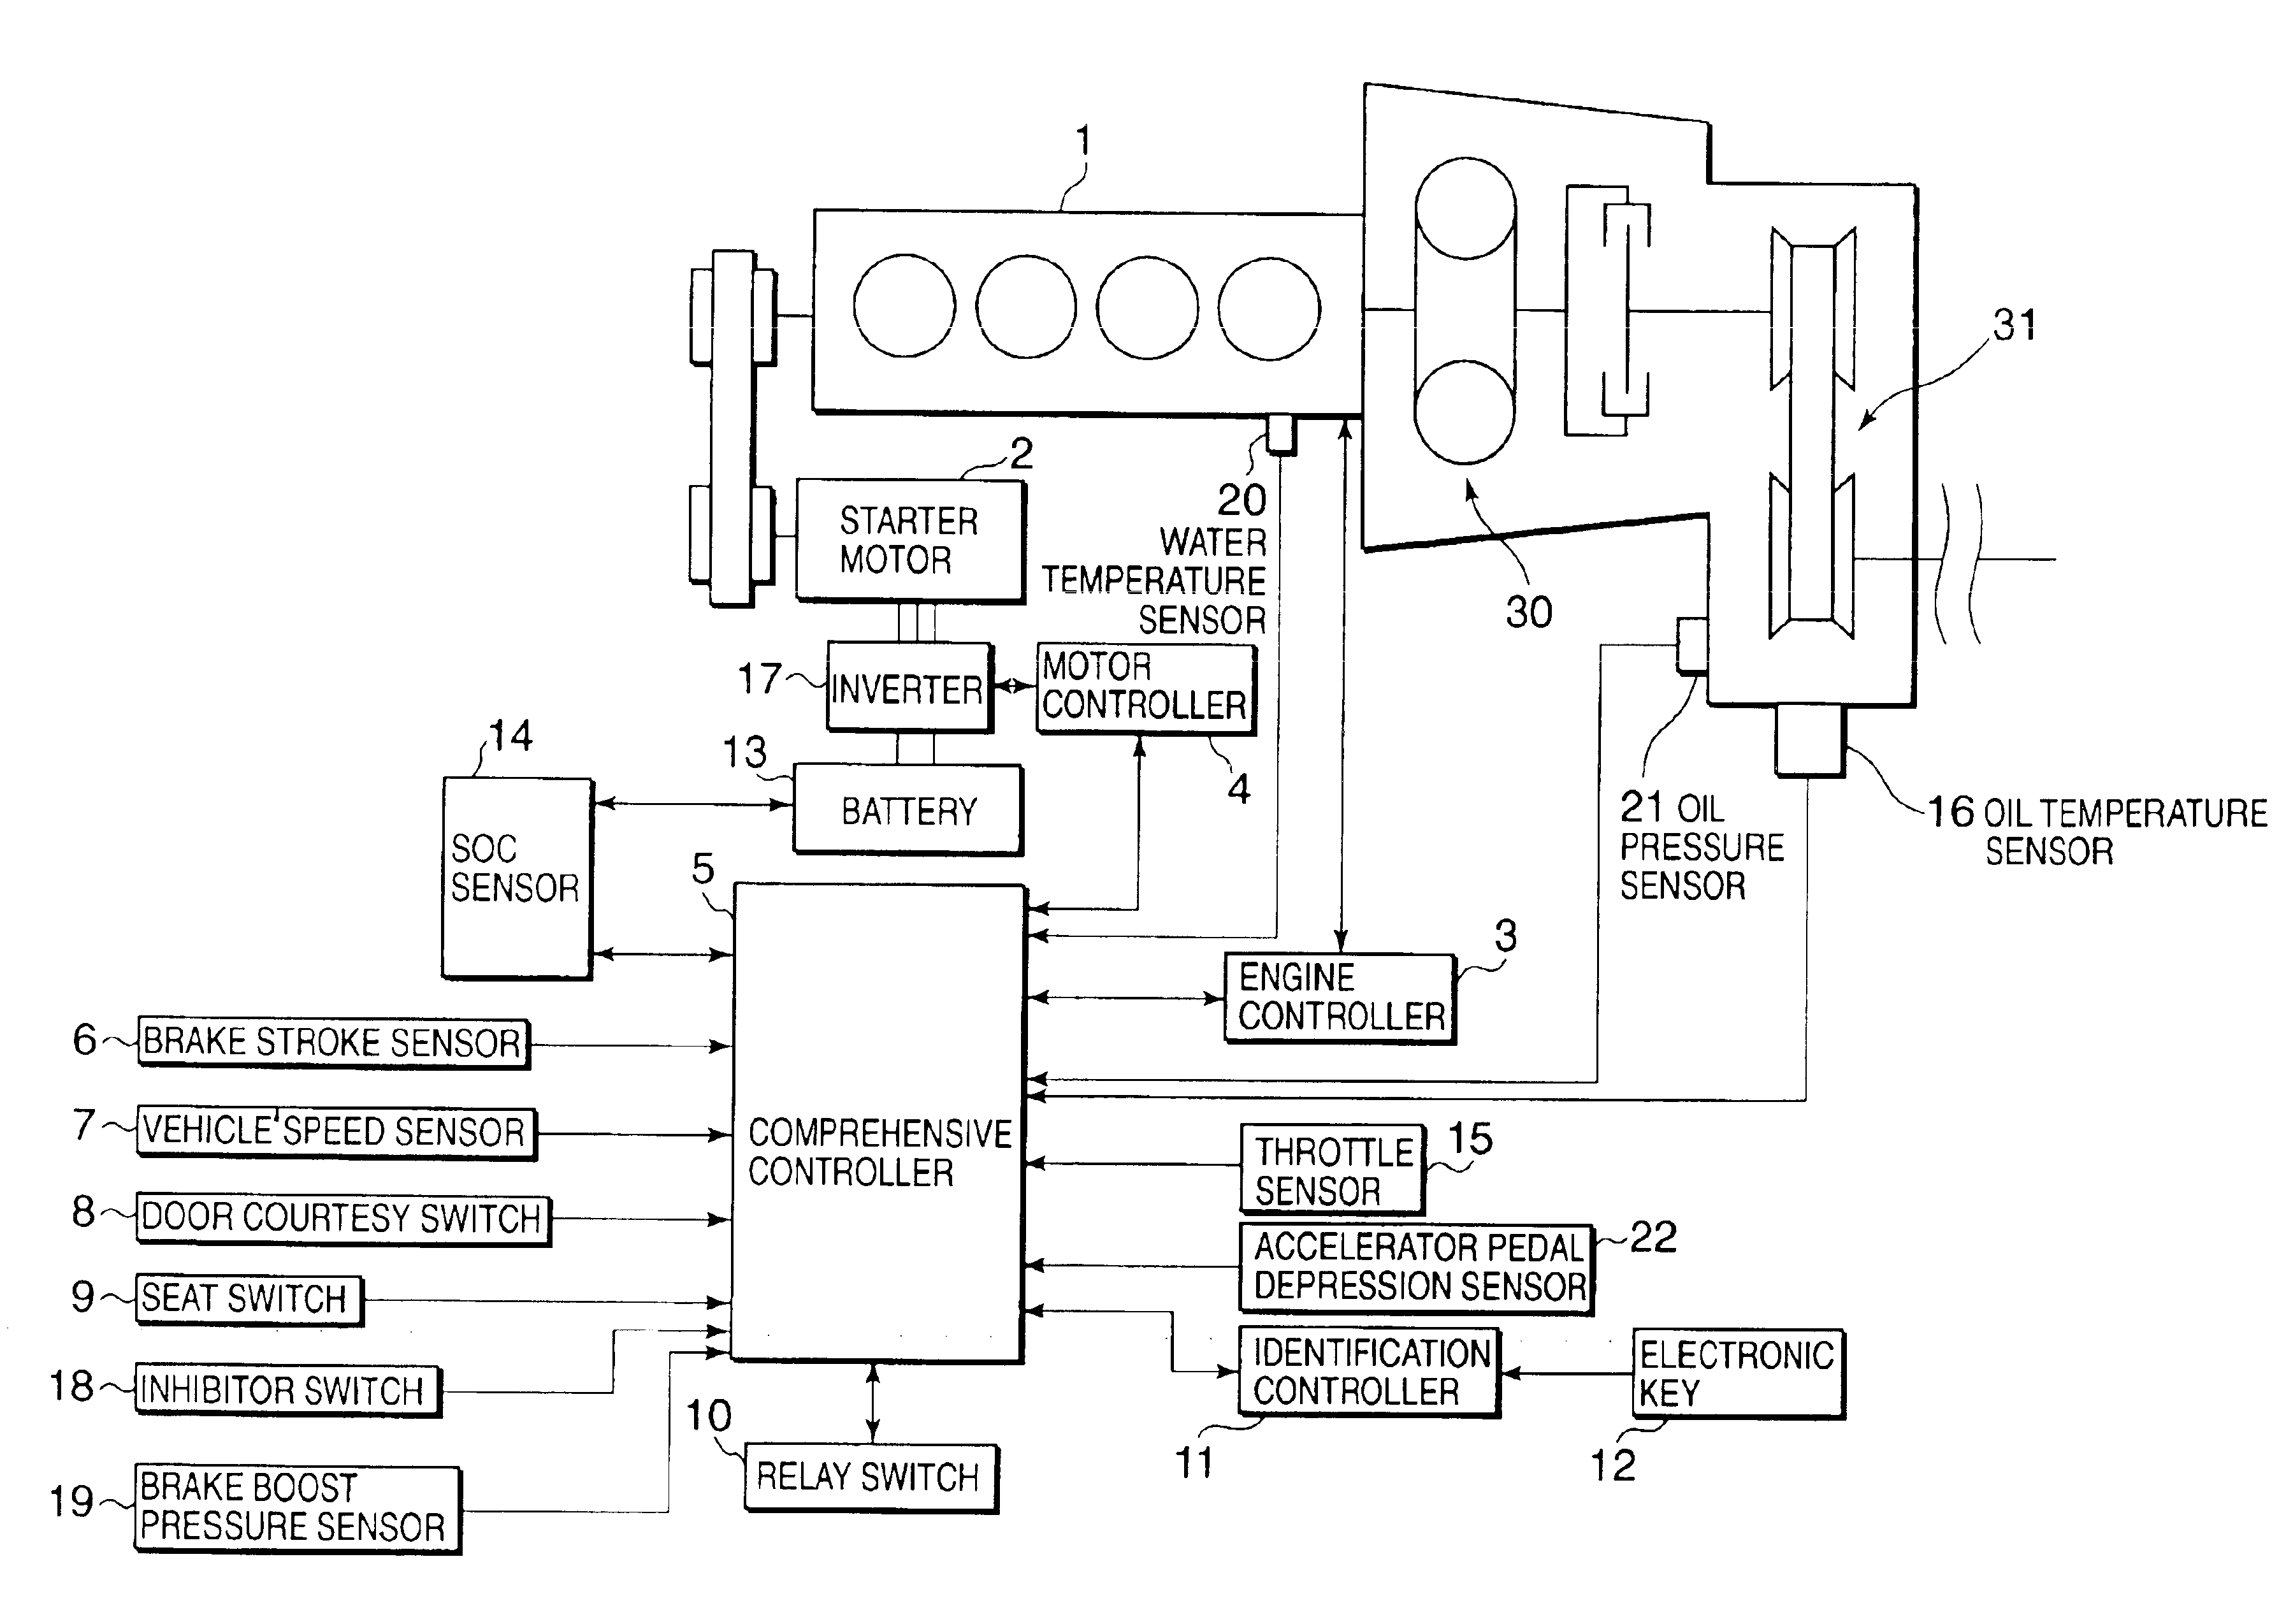 Engine control for vehicle using electronic key system